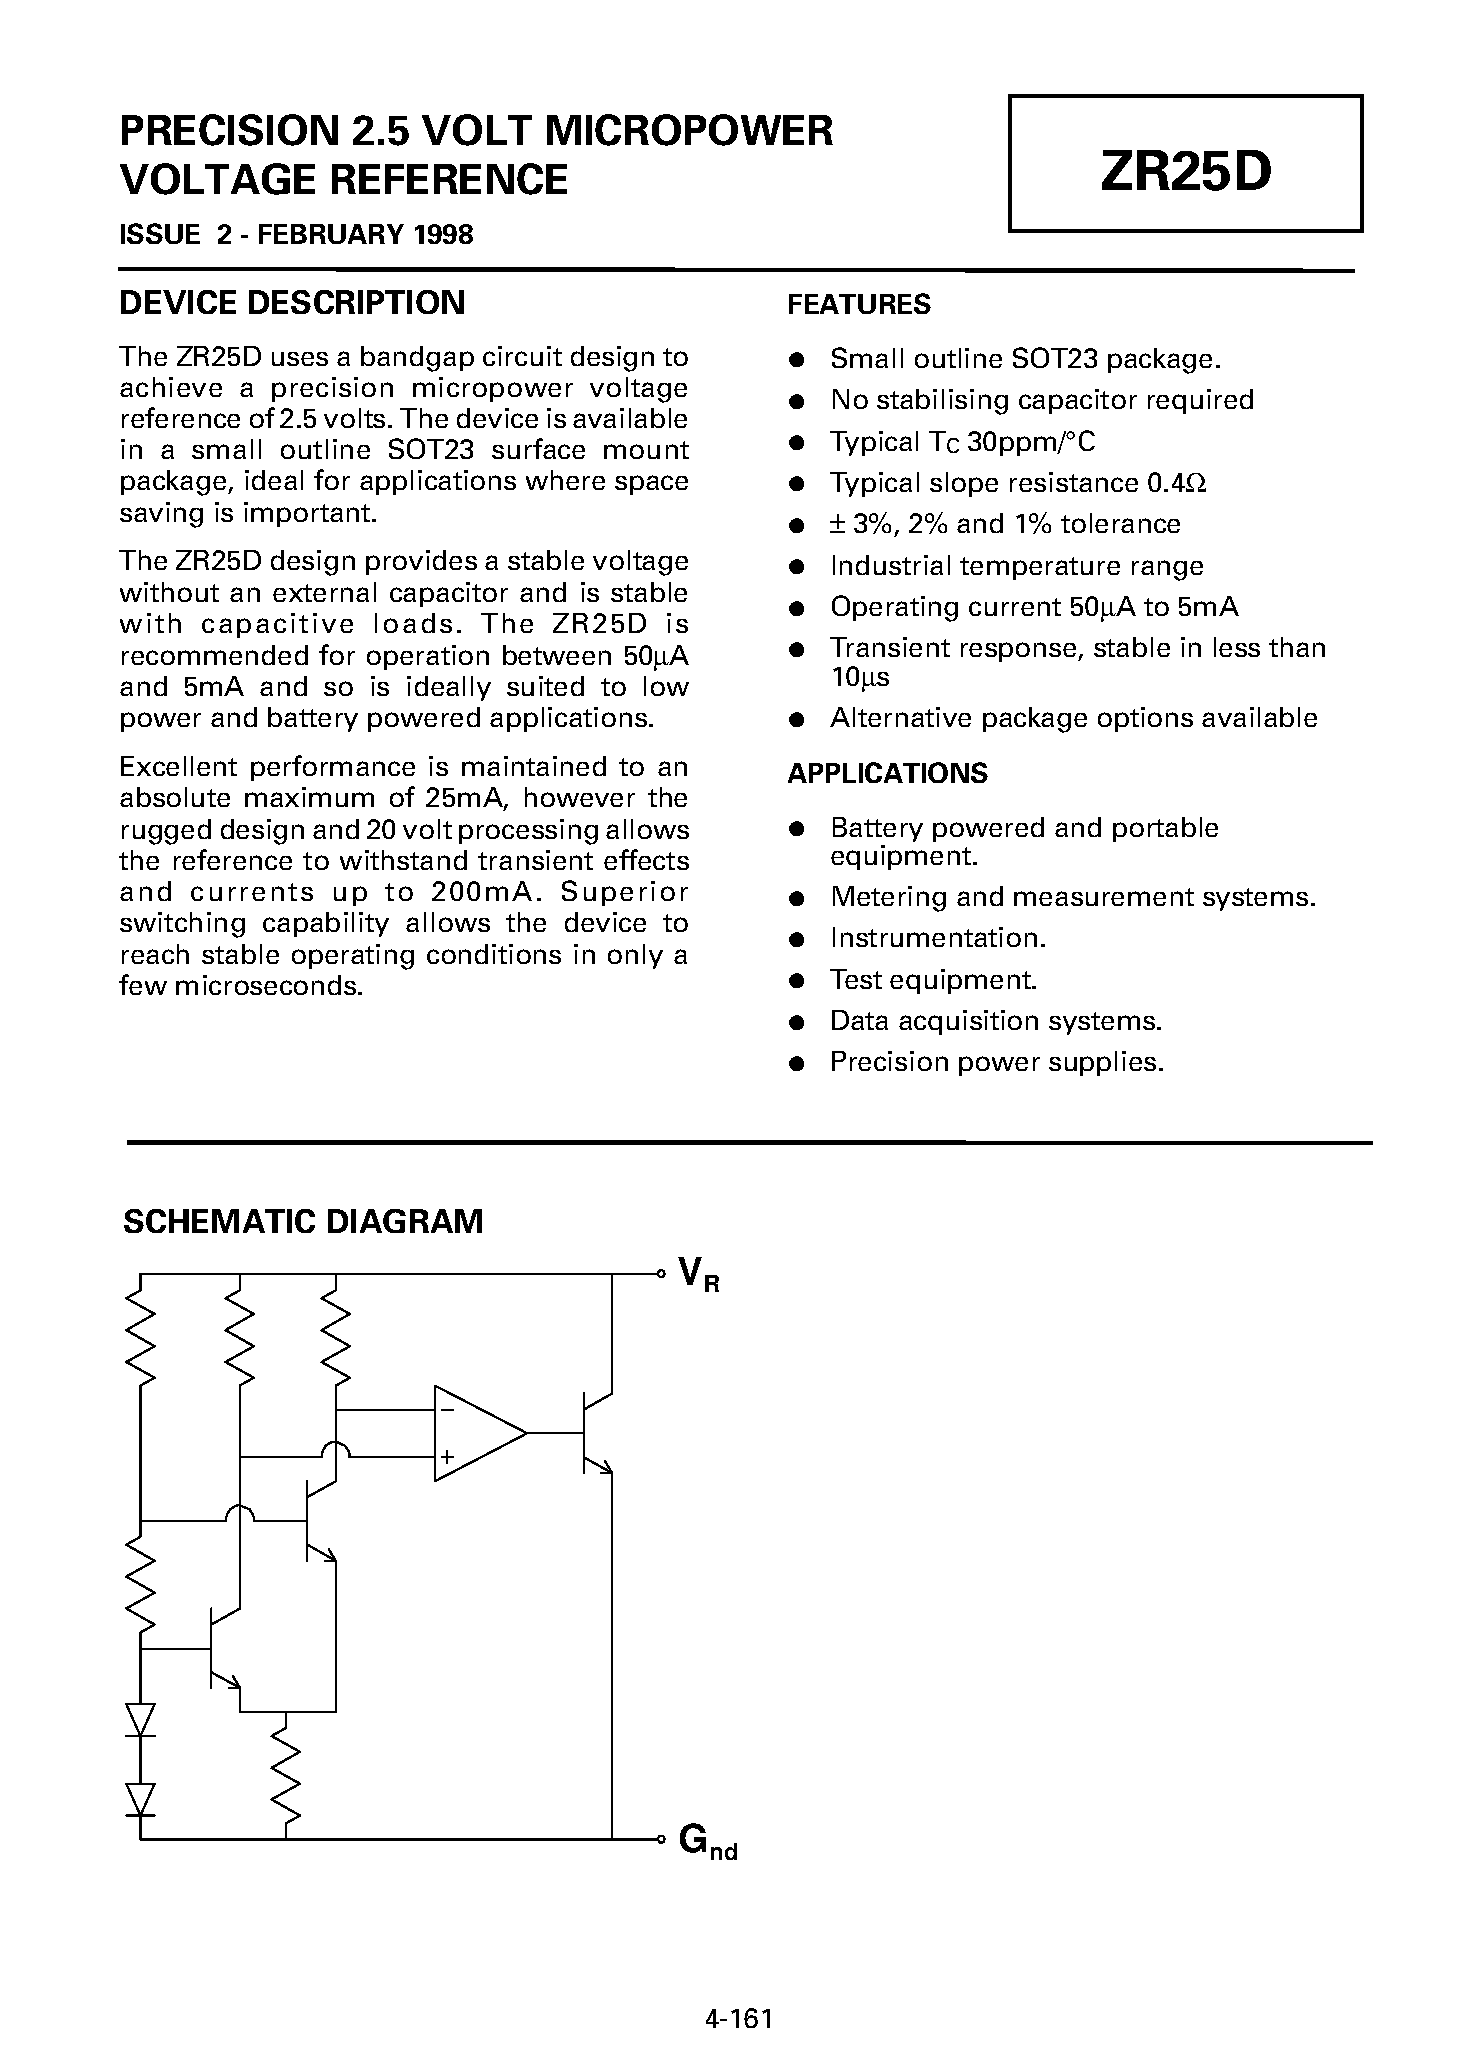 Datasheet ZR25D01 - PRECISION 2.5 VOLT MICROPOWER VOLTAGE REFERENCE page 1